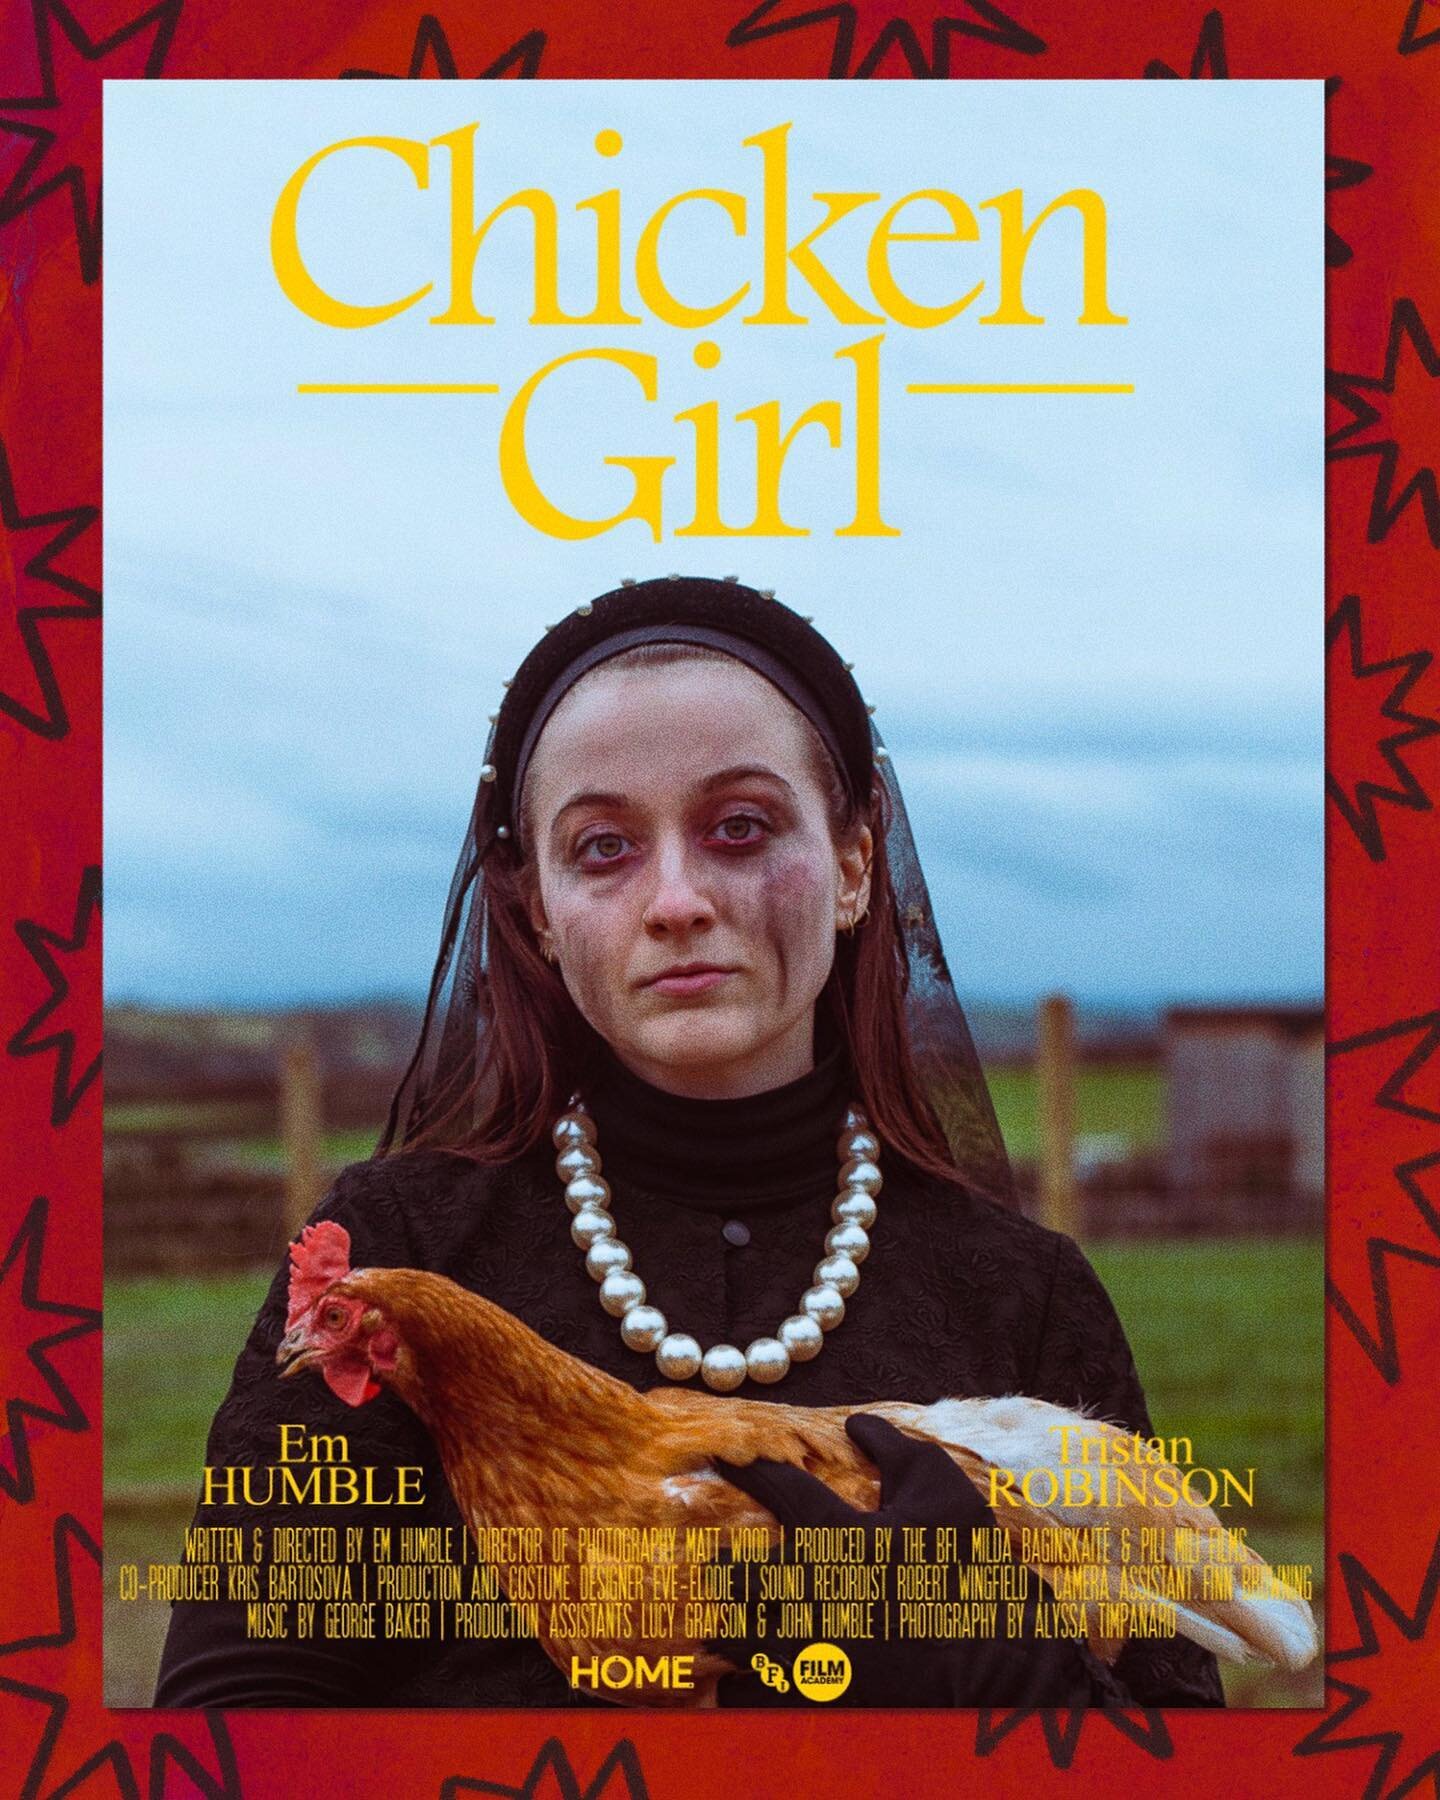 ✨ 𝒾&rsquo;𝓂 𝓃𝑜𝓉 𝒶 𝑔𝒾𝓇𝓁
𝓃𝑜𝓉 𝓎𝑒𝓉 𝒶 𝒸𝒽𝒾𝒸𝓀𝑒𝓃 ✨

for more writing of that calibre, please come see our short film @chickengirlfilm !! 🐓🐓🐓
✨premiering at @hycmanchester on saturday 29th april✨ it would be absolutely dreamy to see